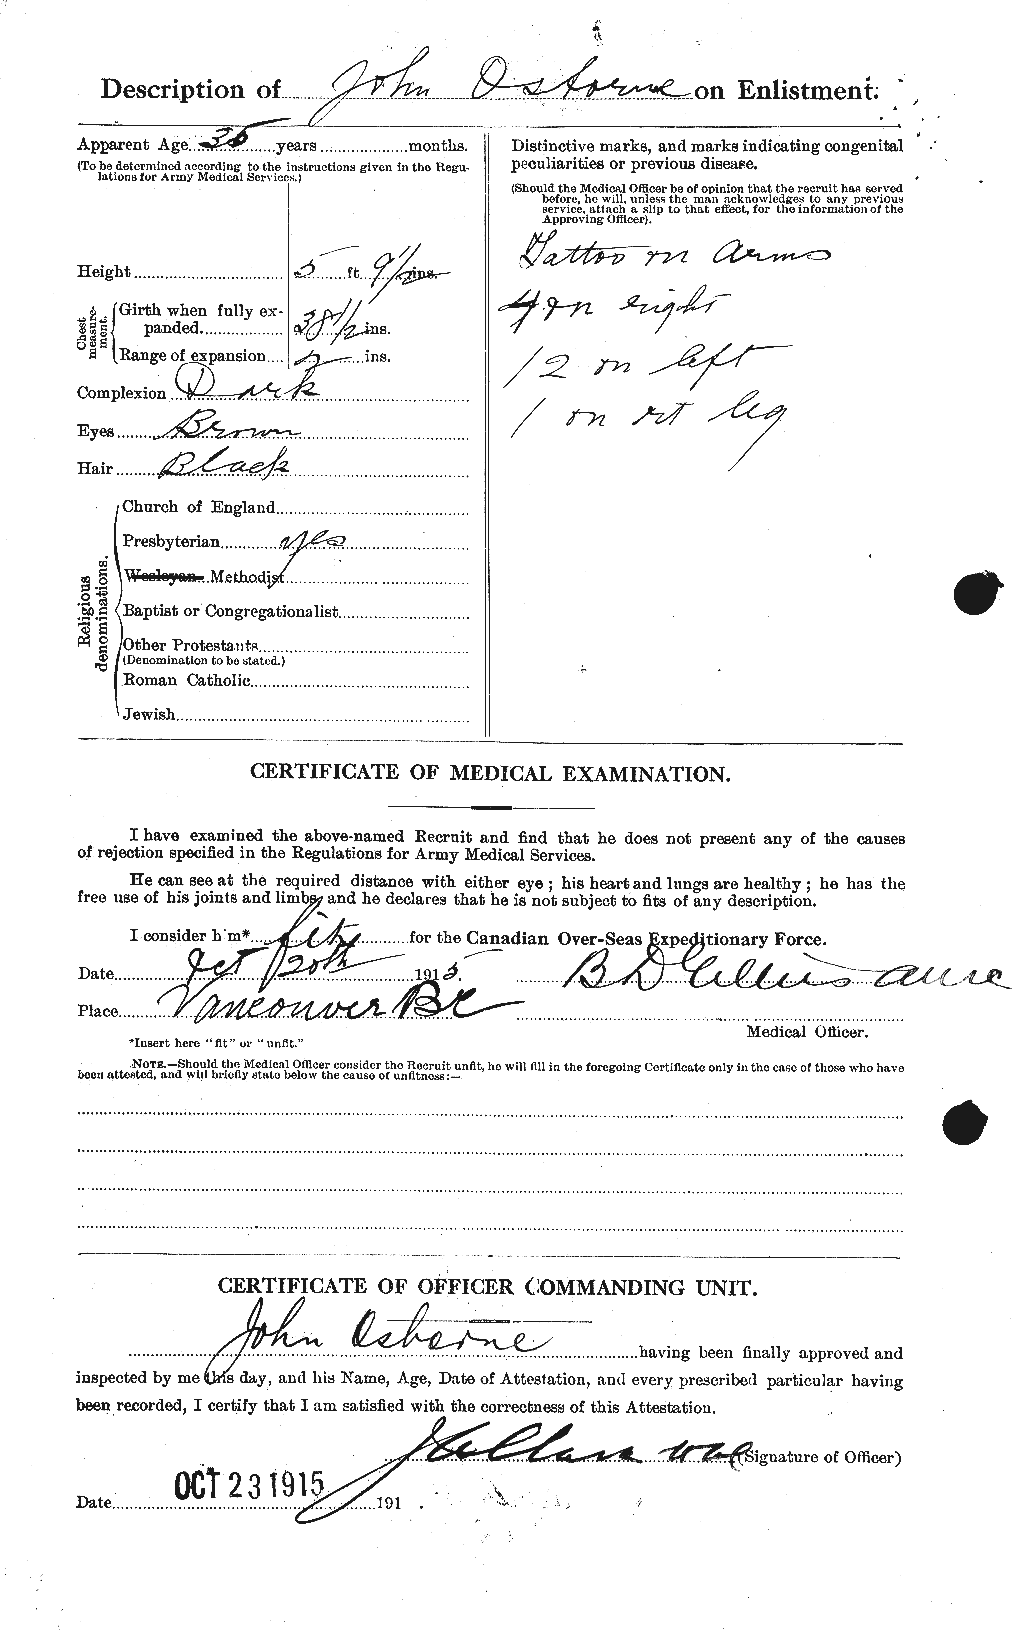 Personnel Records of the First World War - CEF 559861b